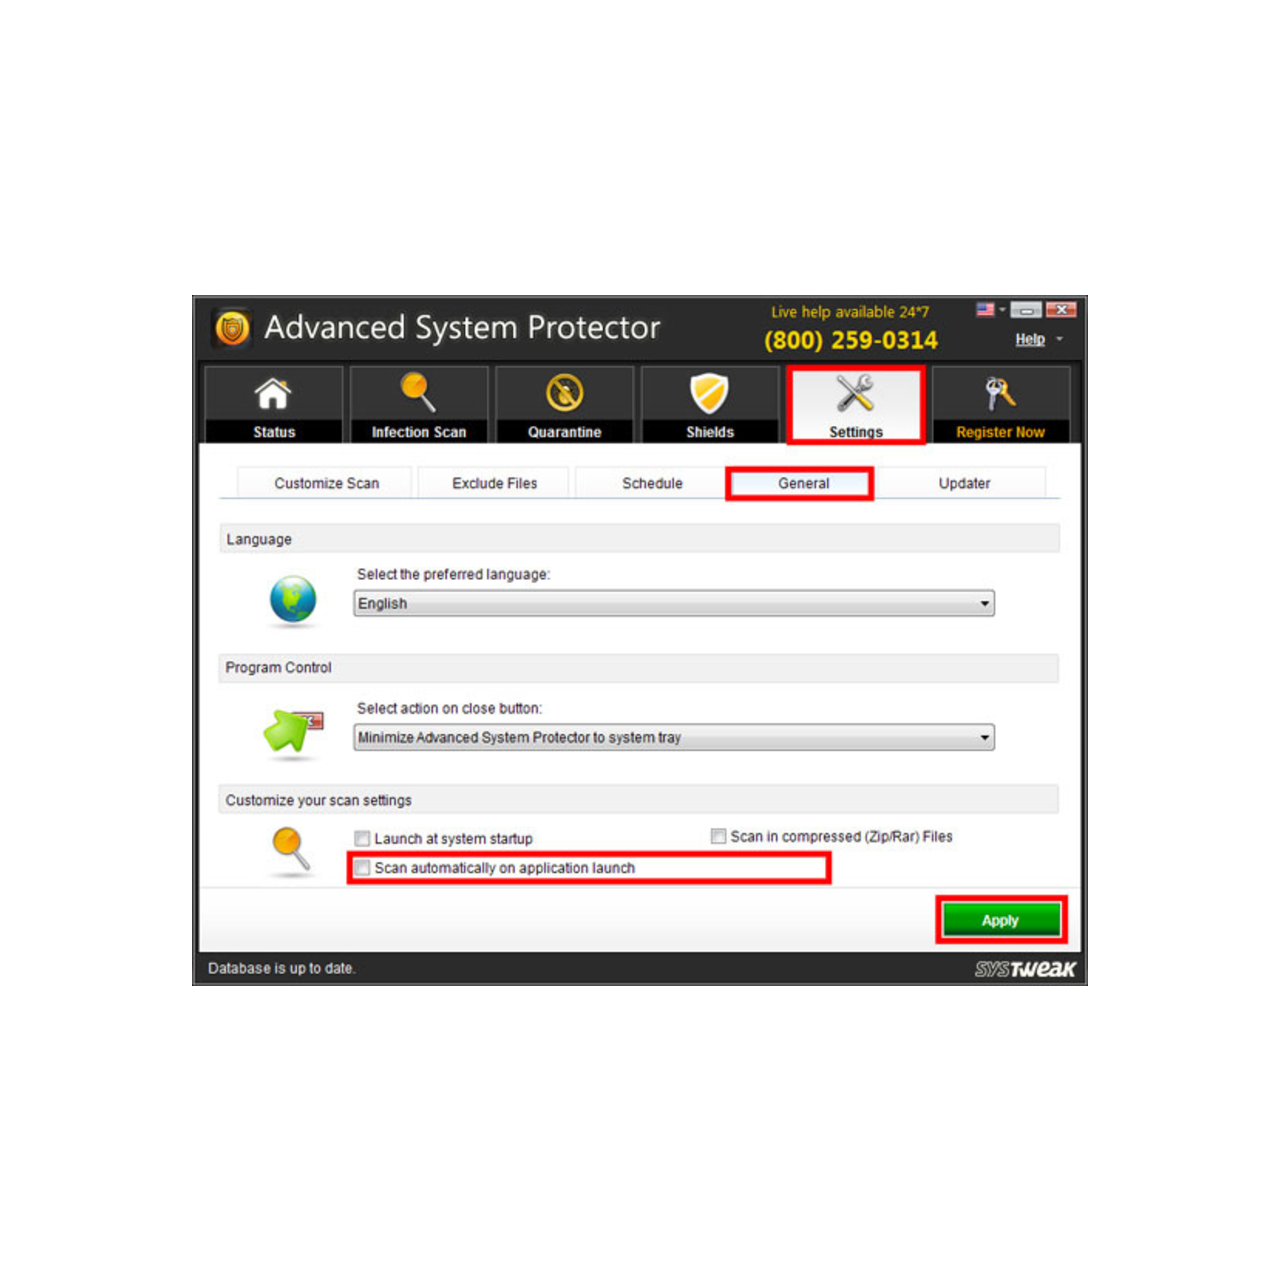 Advanced System Optimizer 3.81.8181.238 download the new for windows